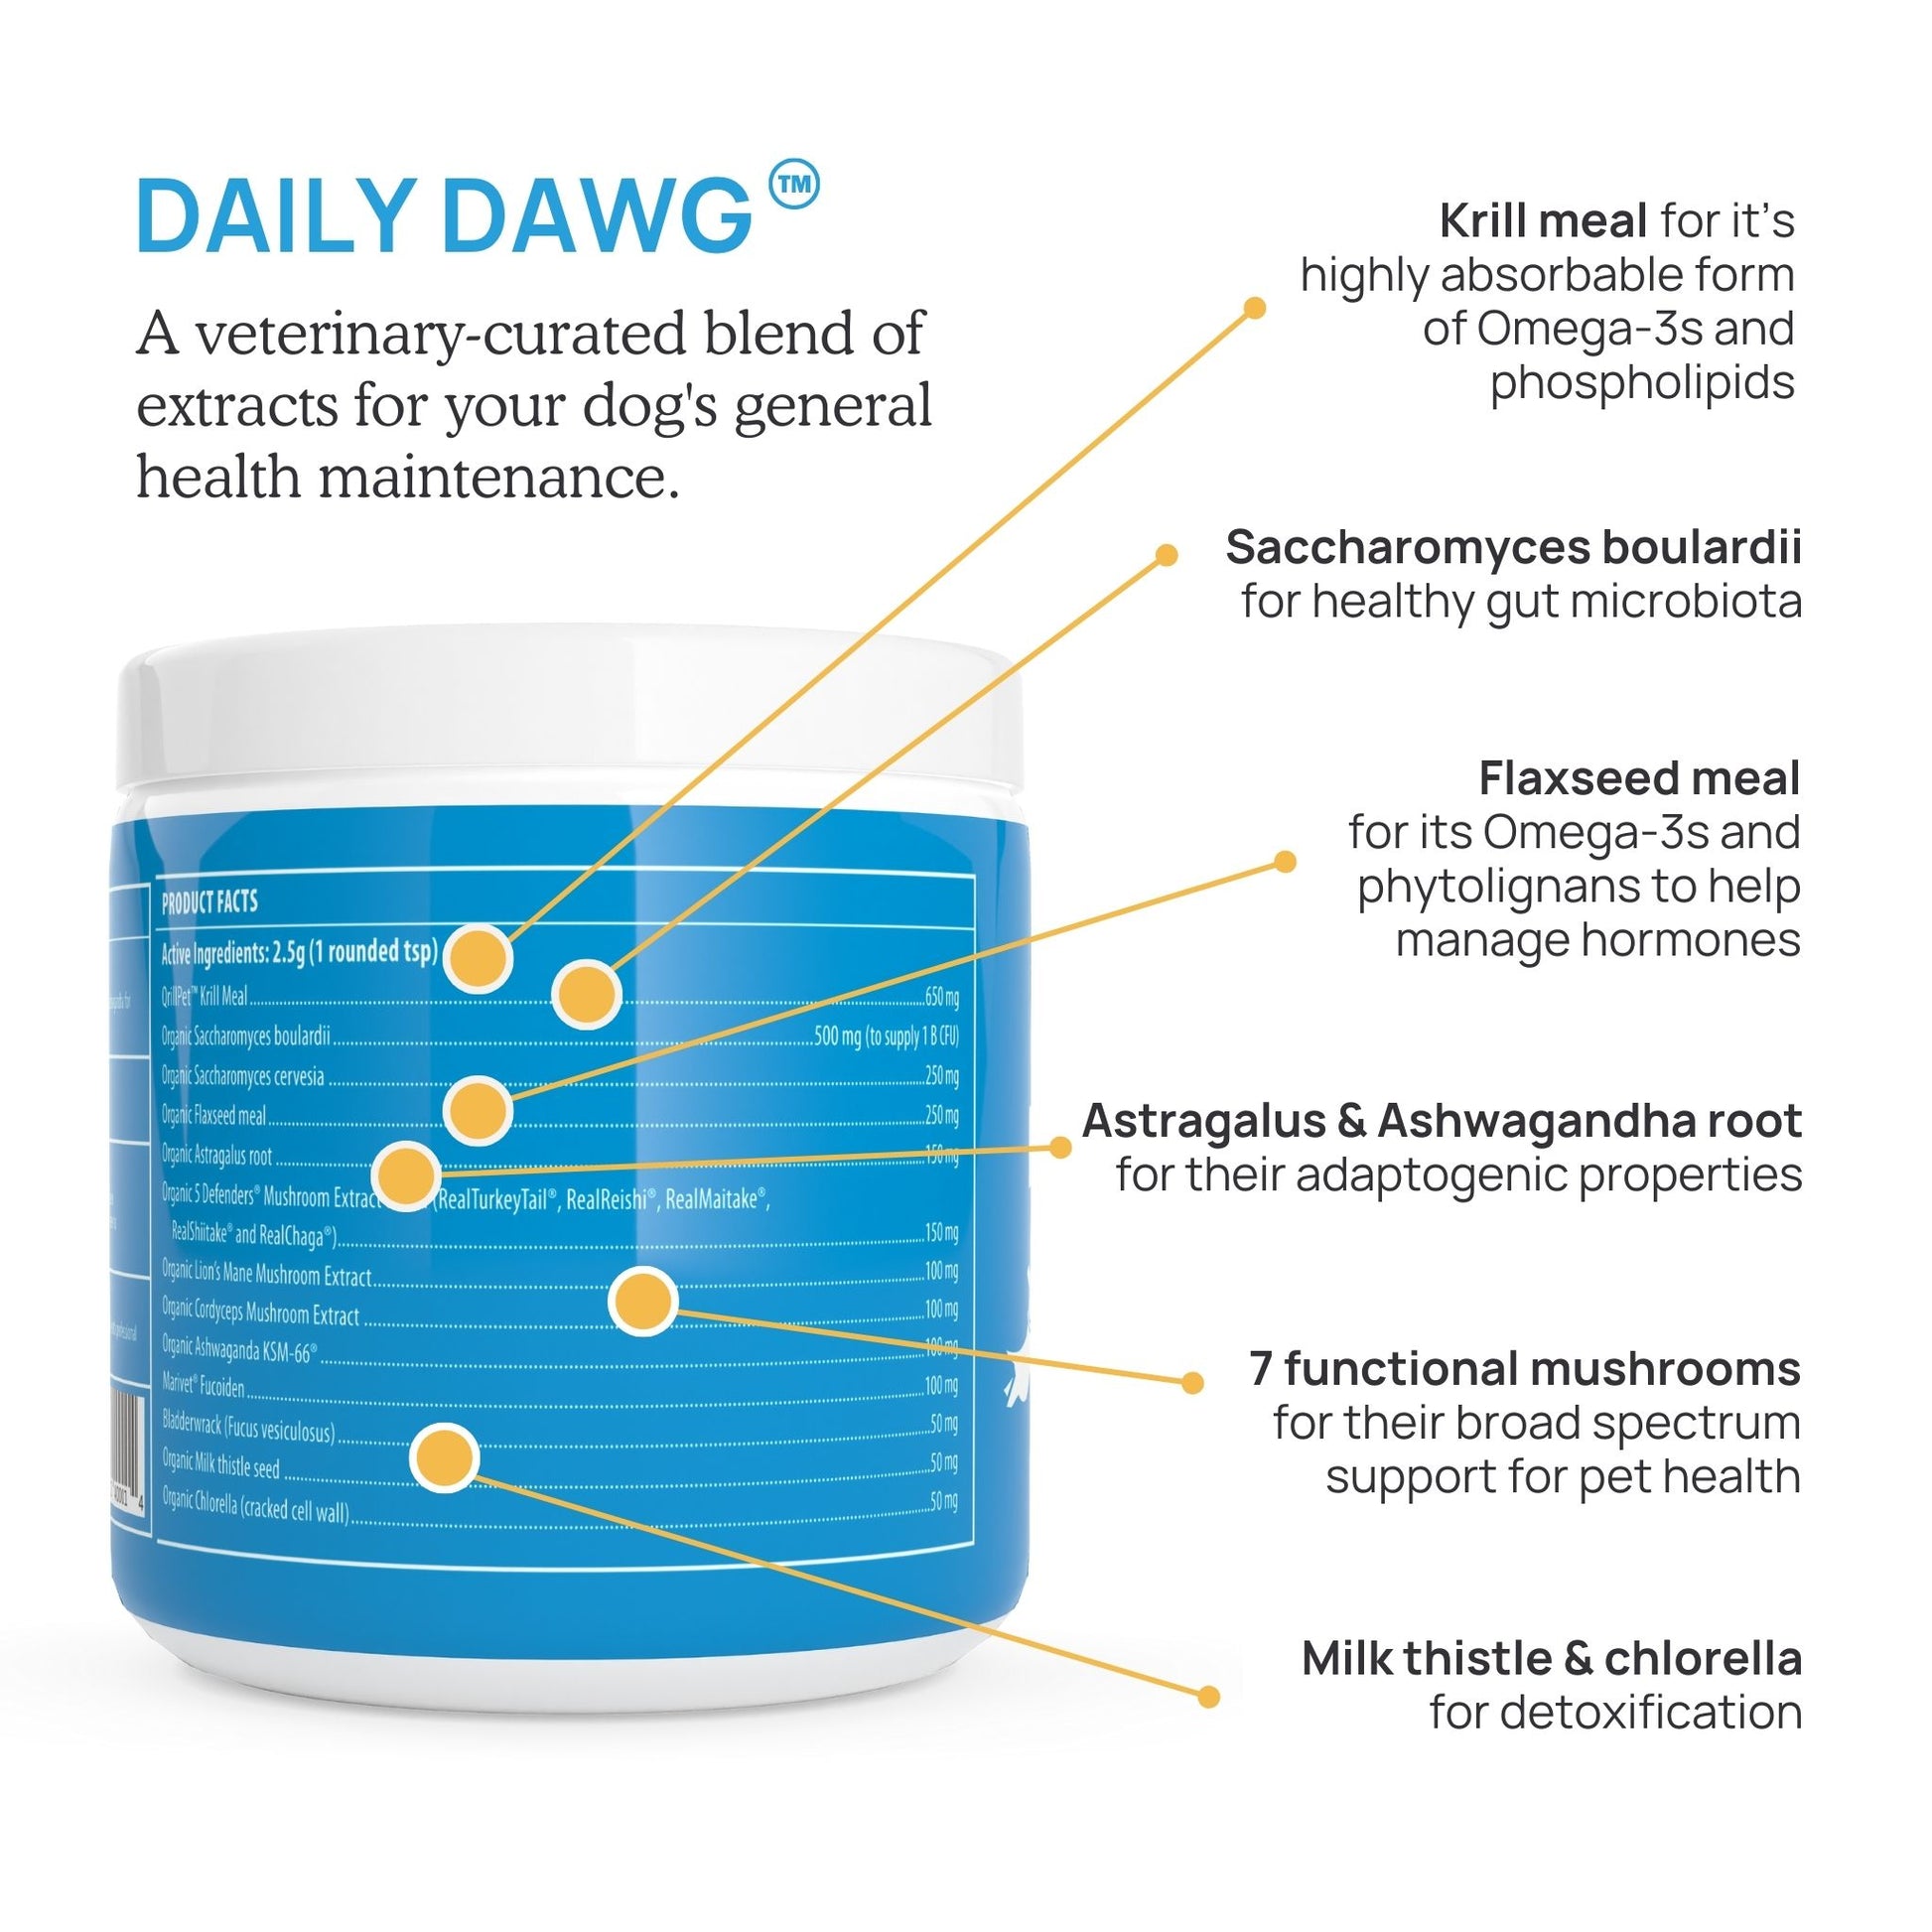 Daily Dawg Powder for Pets by Real Mushrooms is a veterinary-curated supplement for general health maintenance in dogs and cats.